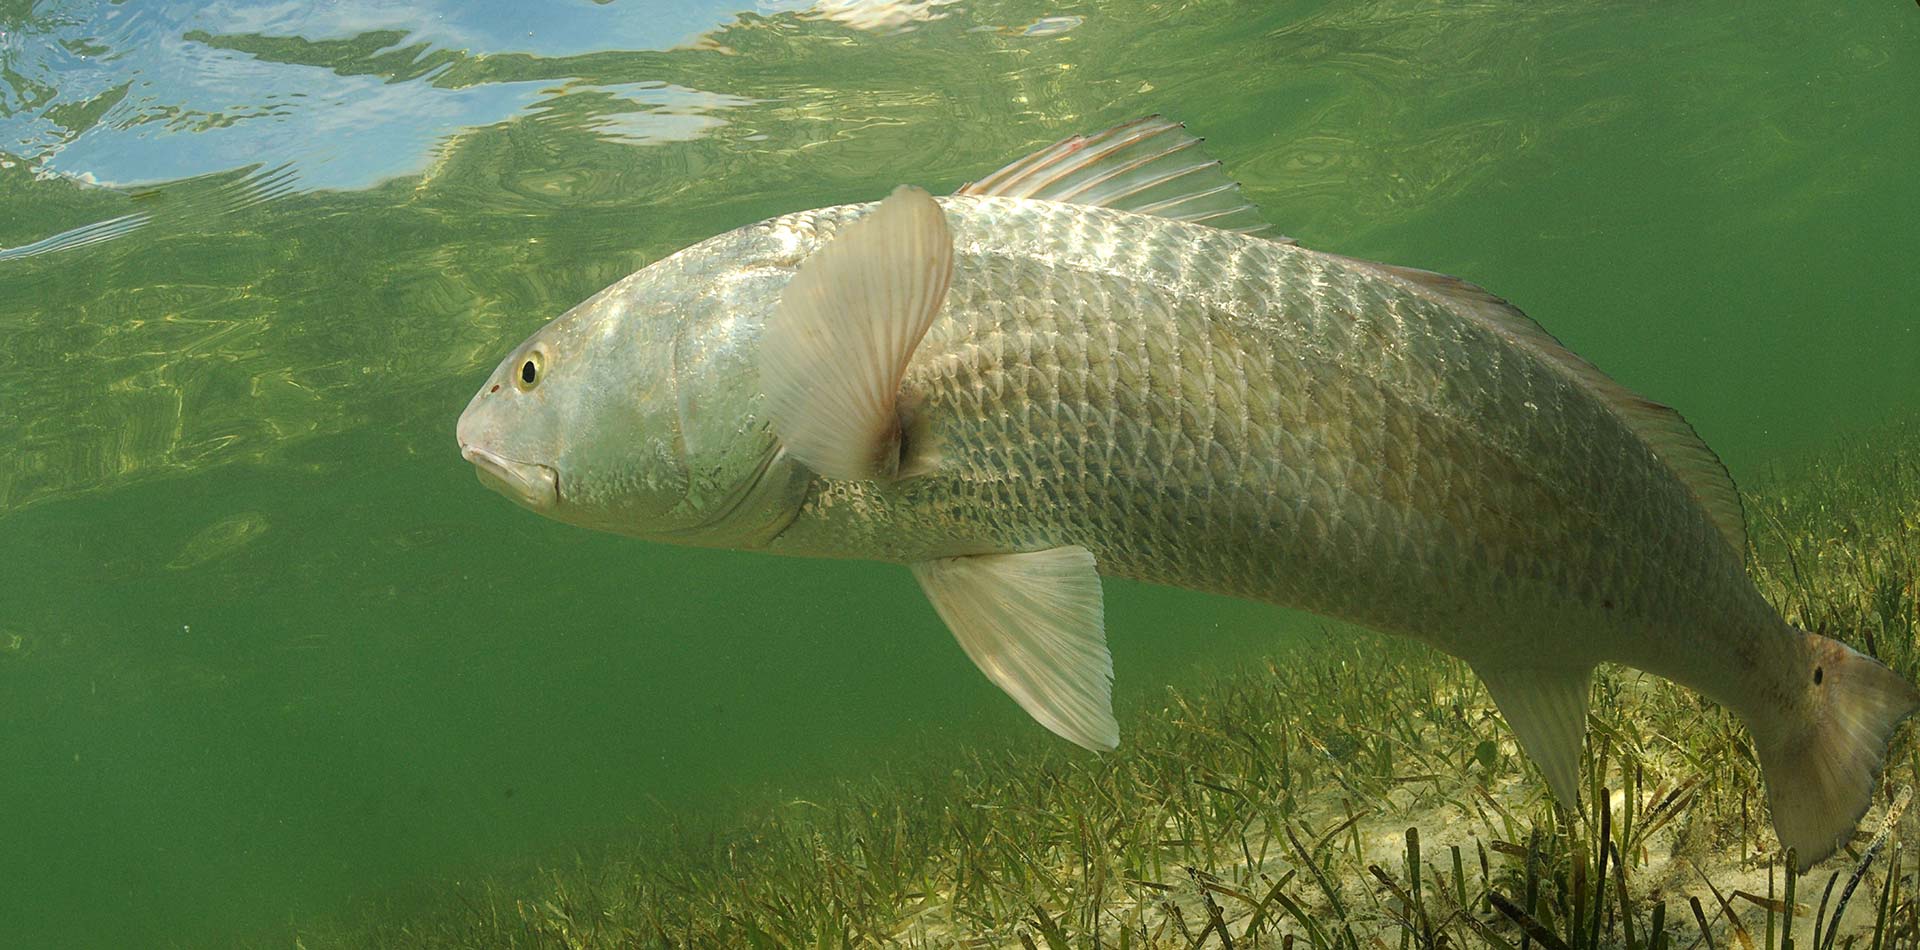 Redfish is swimming in the grass flats of the ocean